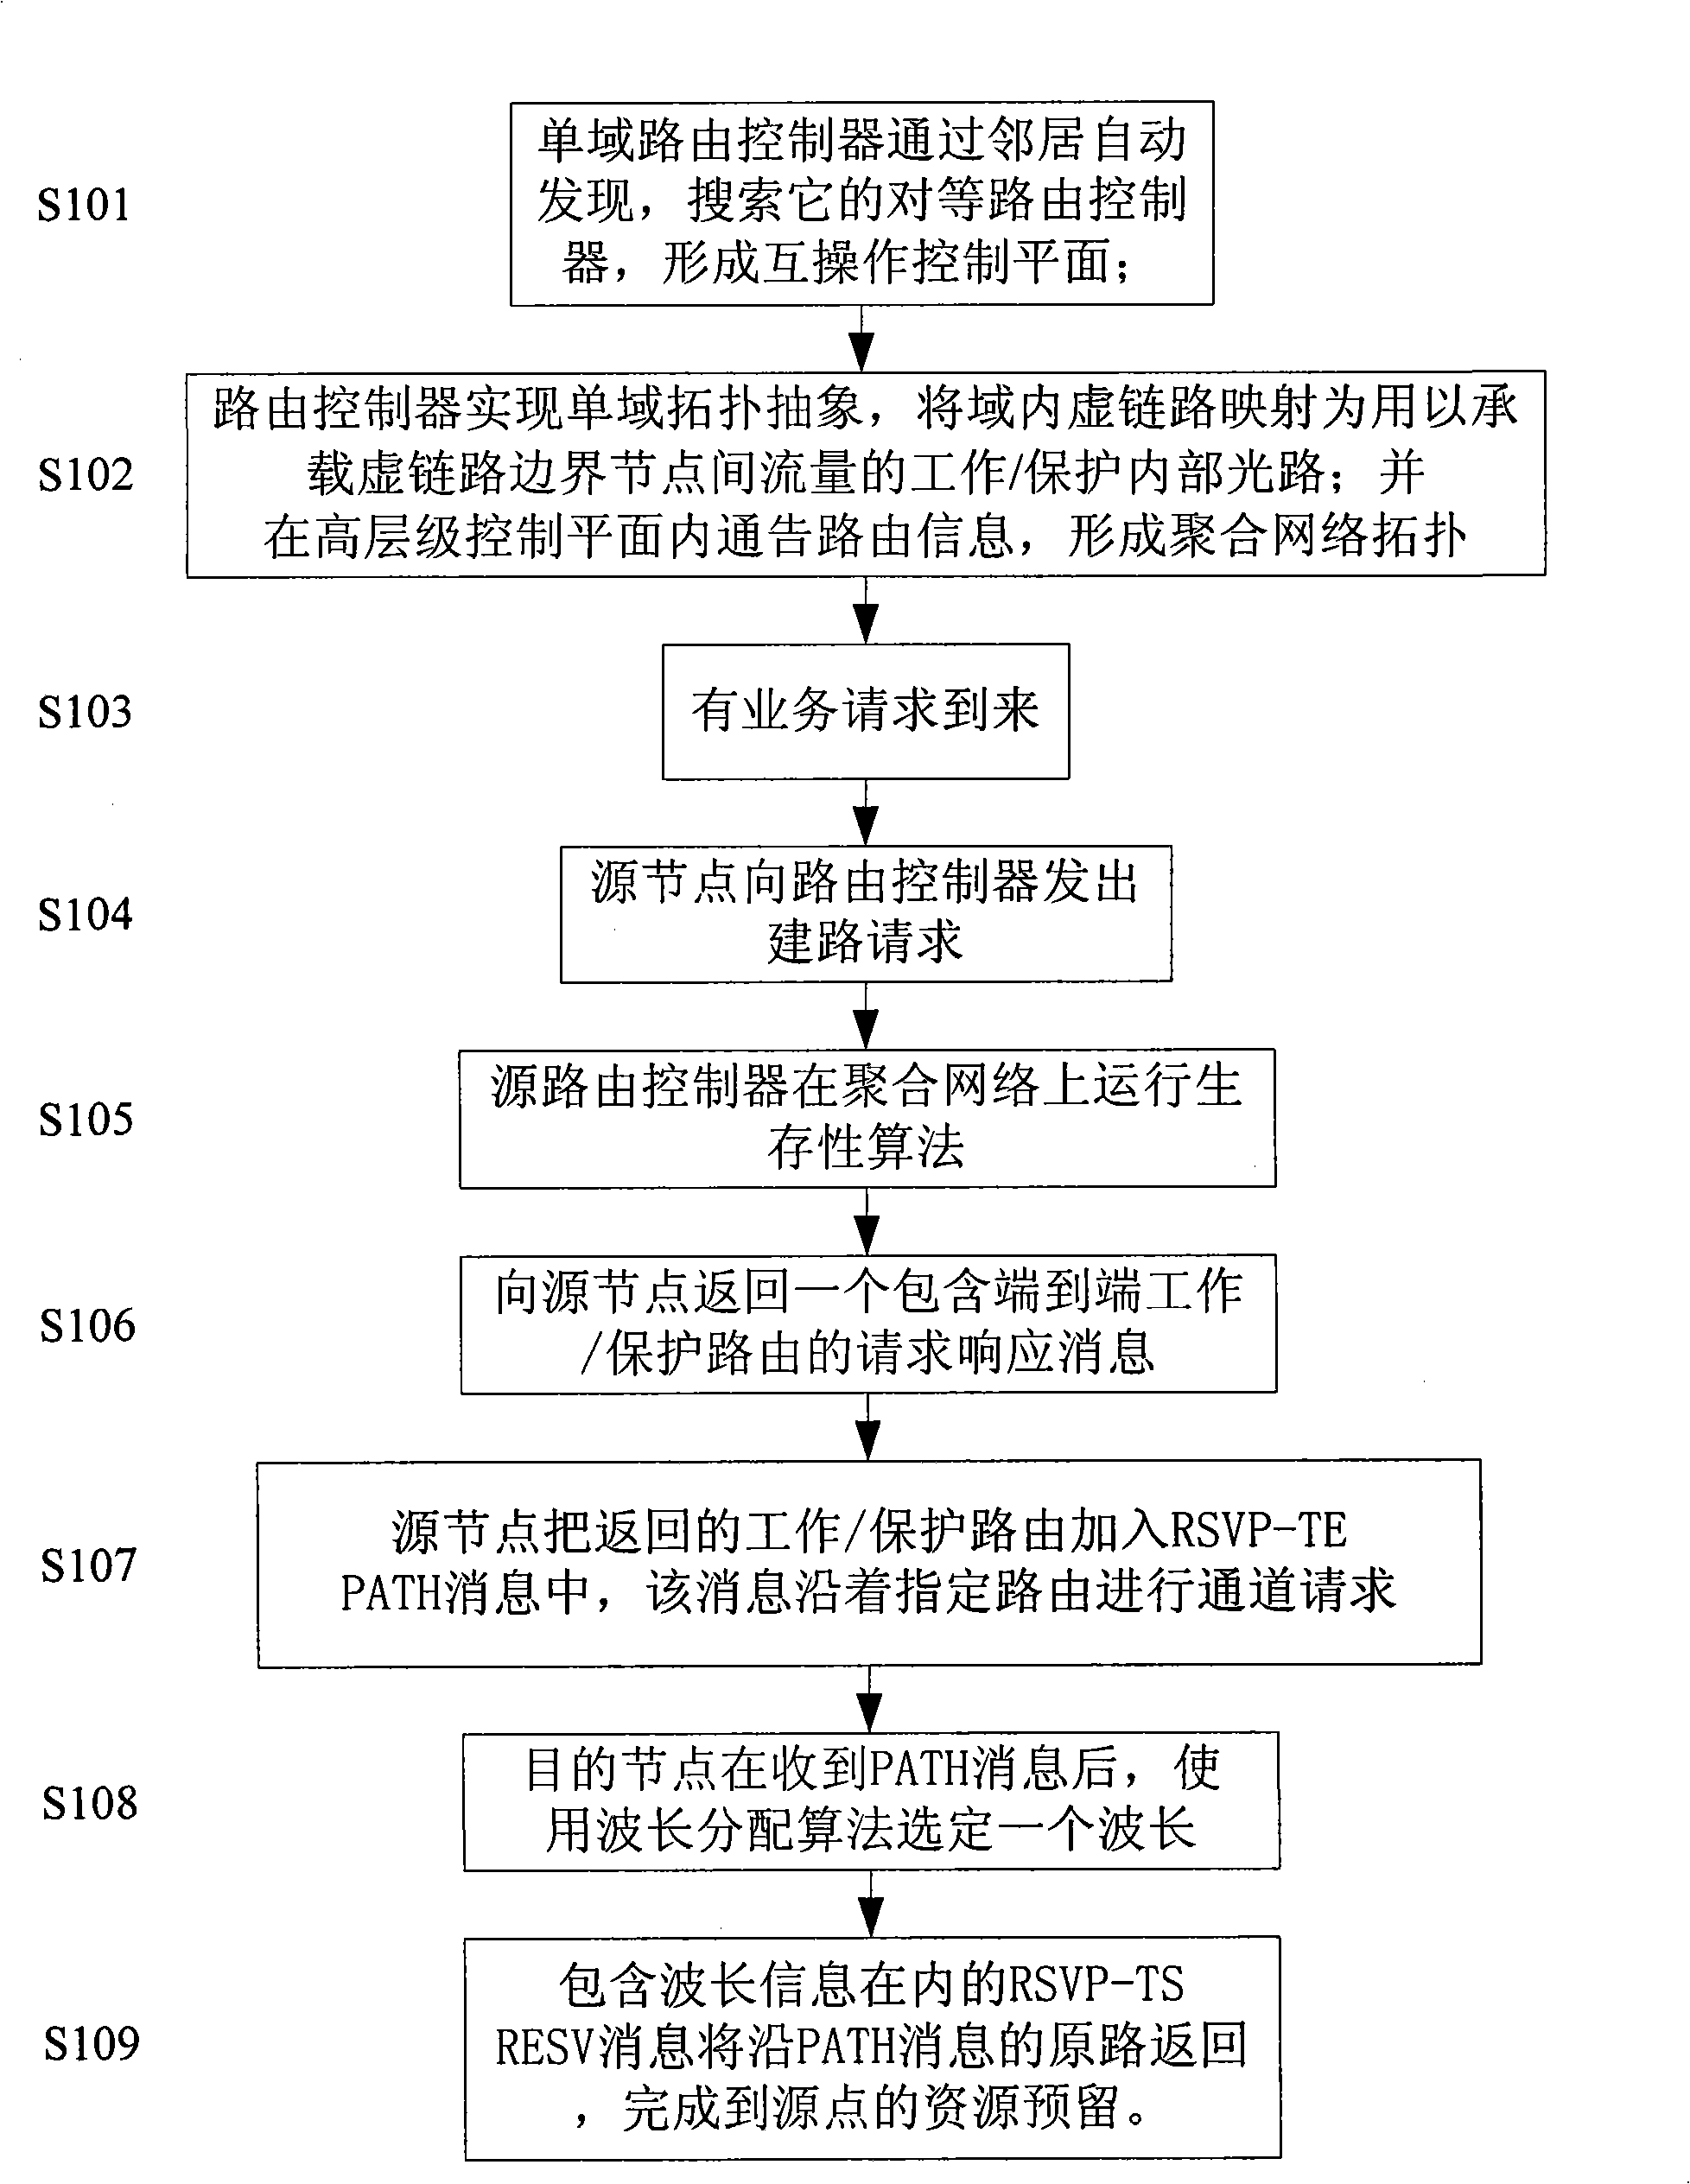 Multi-domain optical network survivability method based on identification of reliable service